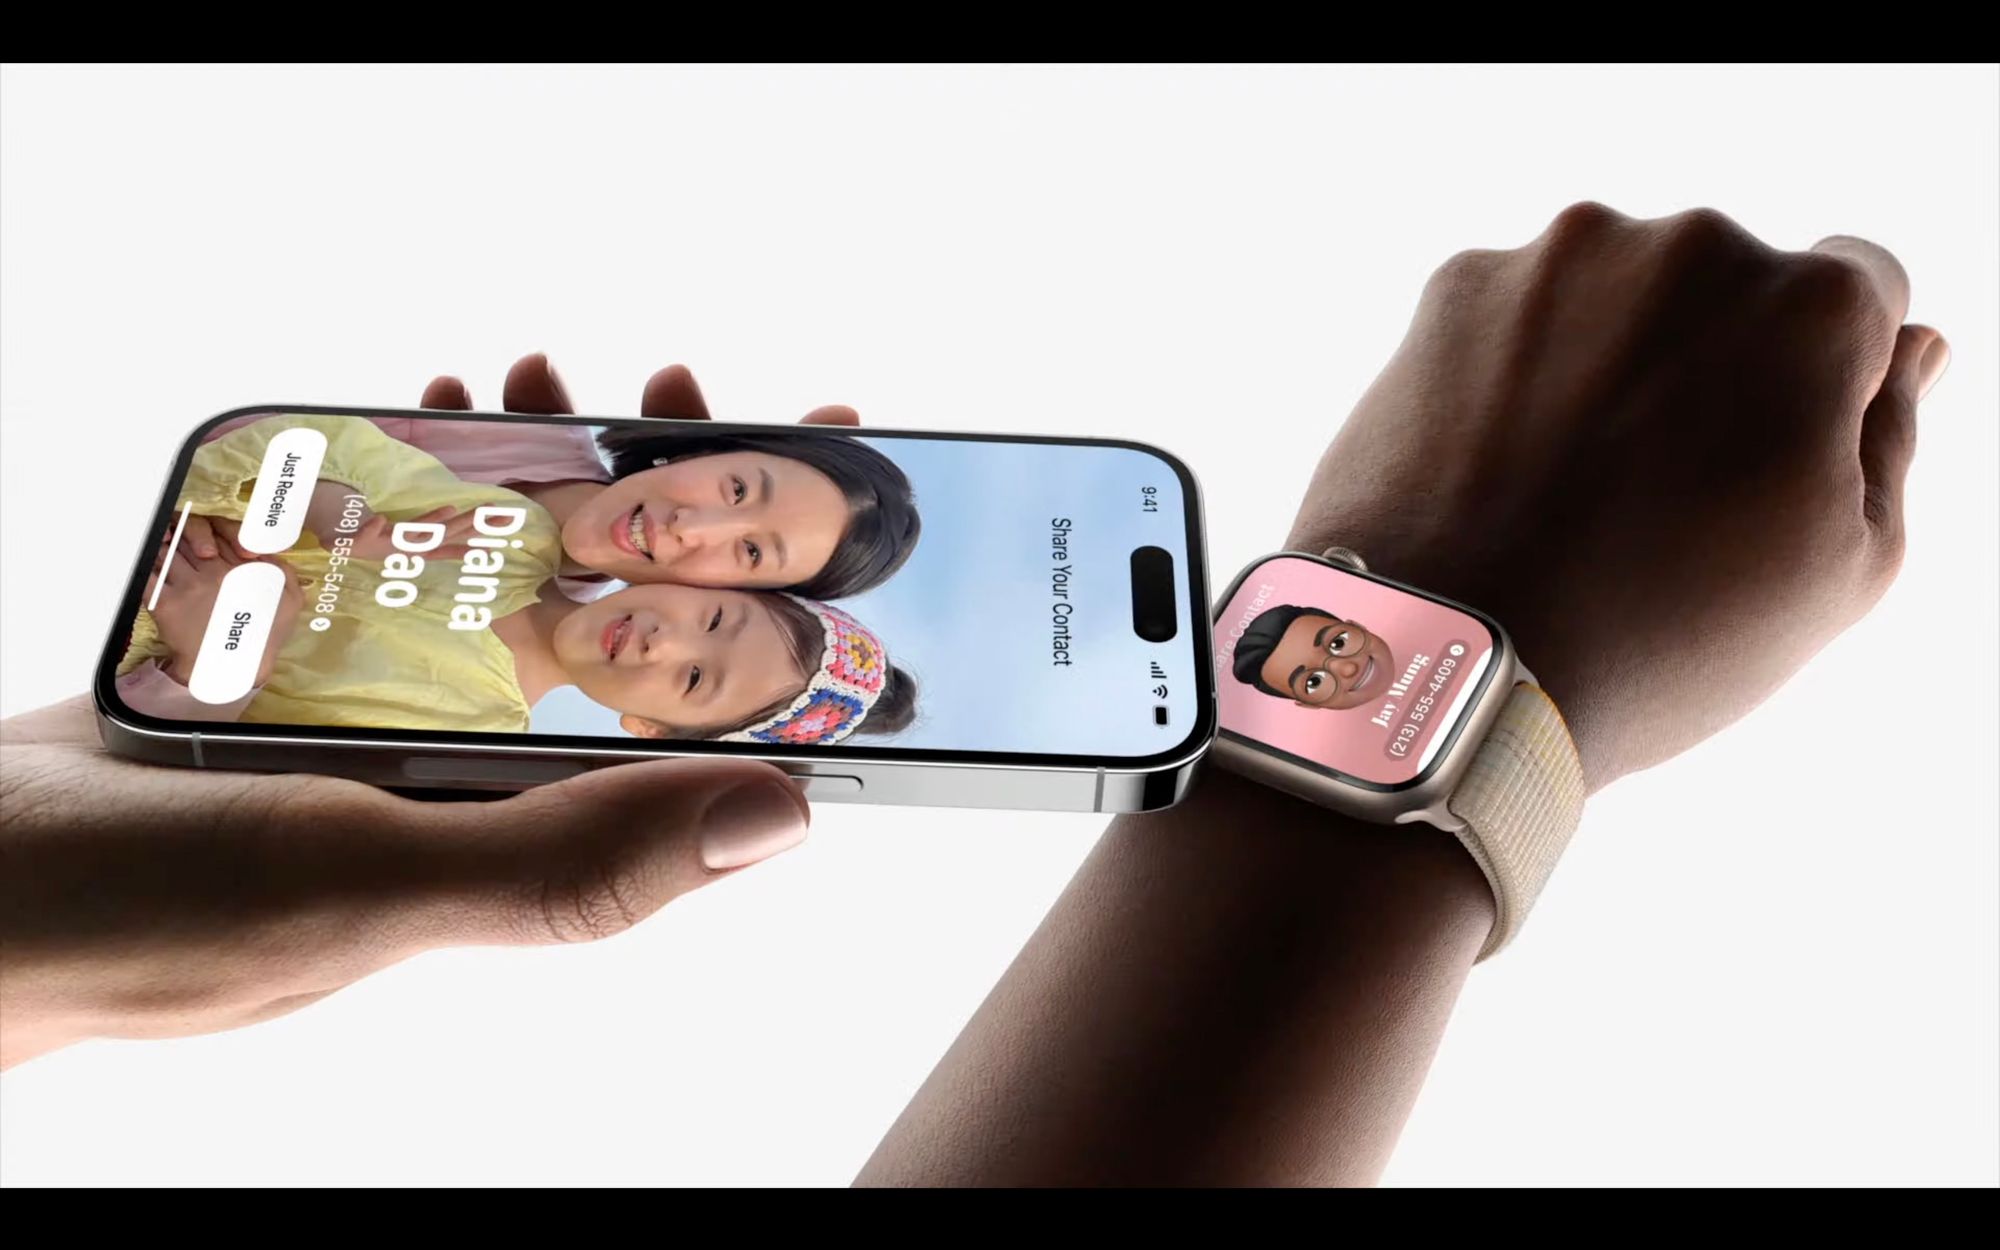 Sharing contact between Apple Watch and iPhone 